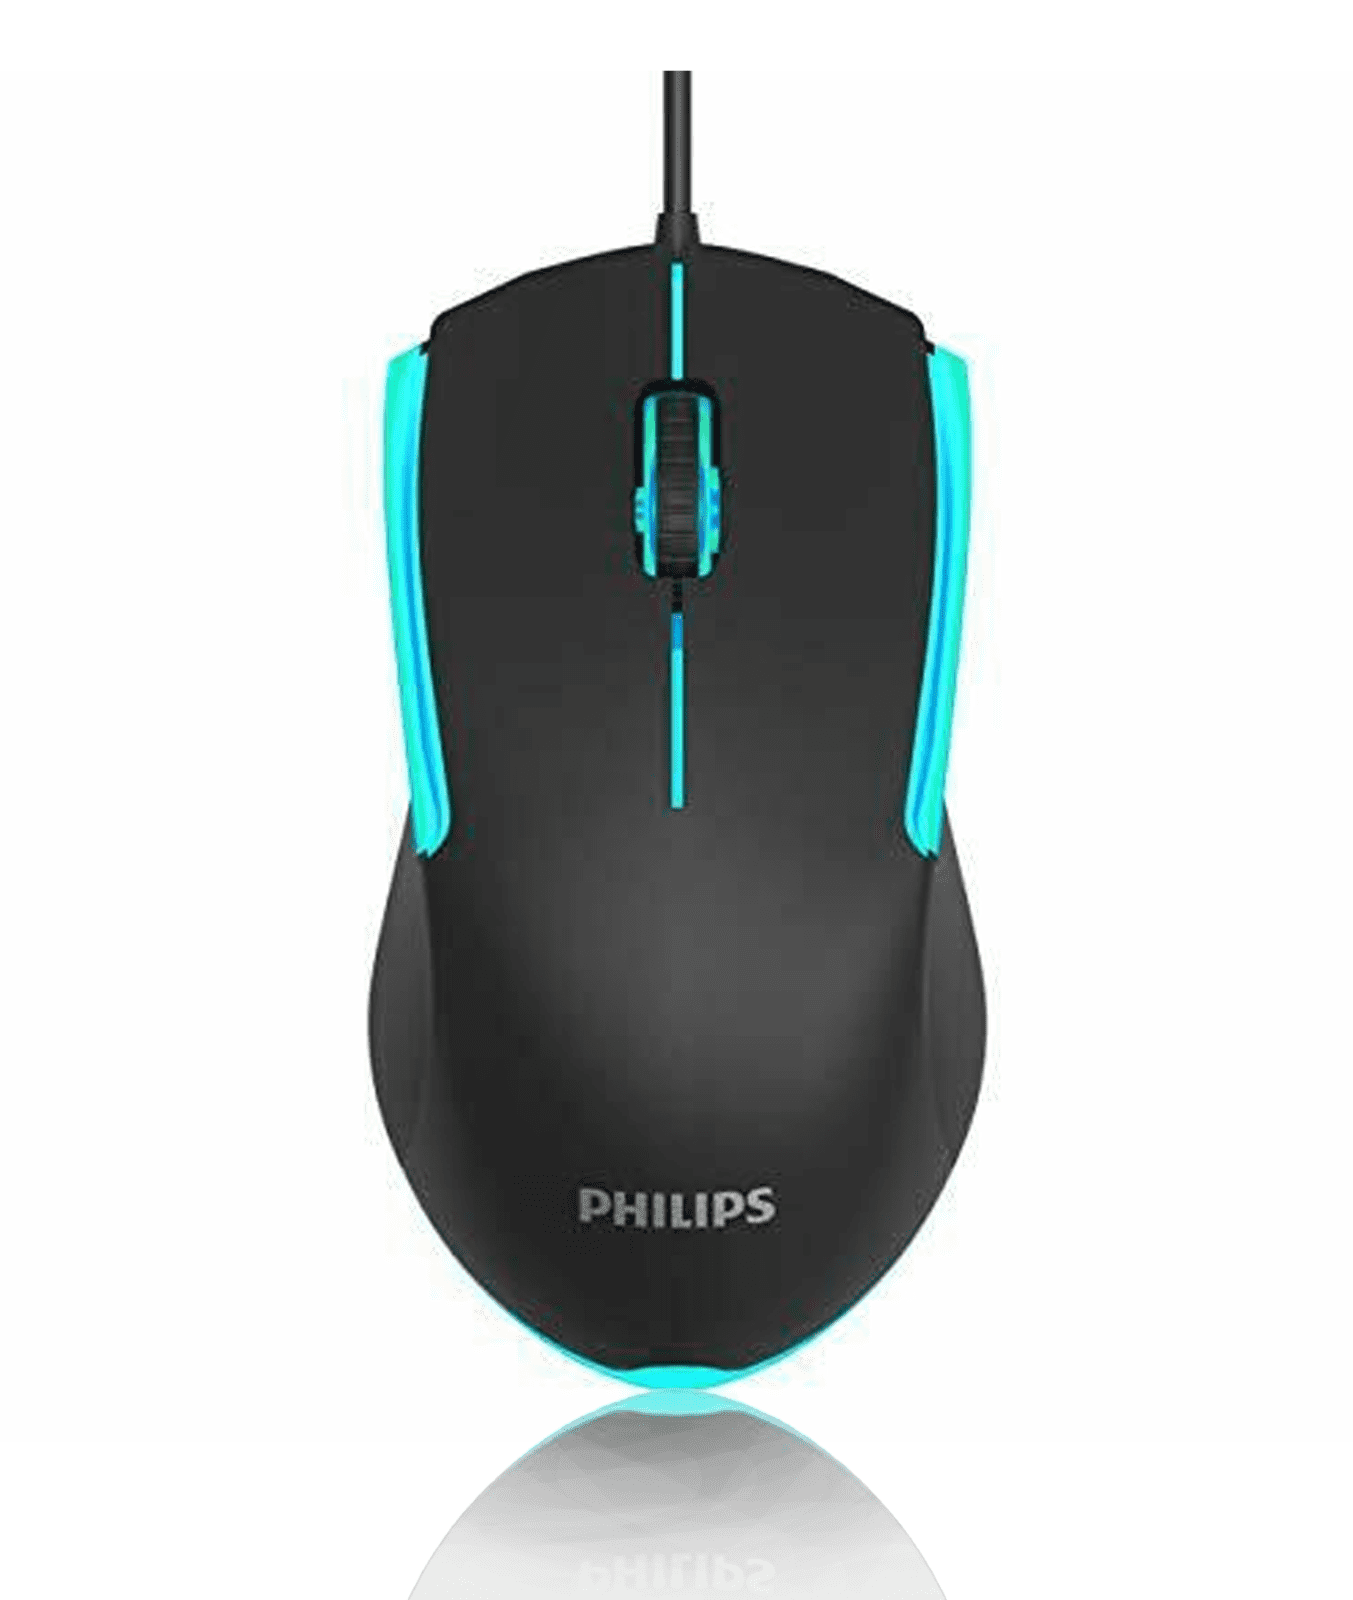 PHILIPS 3-Button Wired Computer Mouse with RGB â€œAmbiglowâ€ FX |  Ambidextrous USB Optical Mouse for Laptop, Chromebook & More | 1200 DPI,  Ergonomic, 